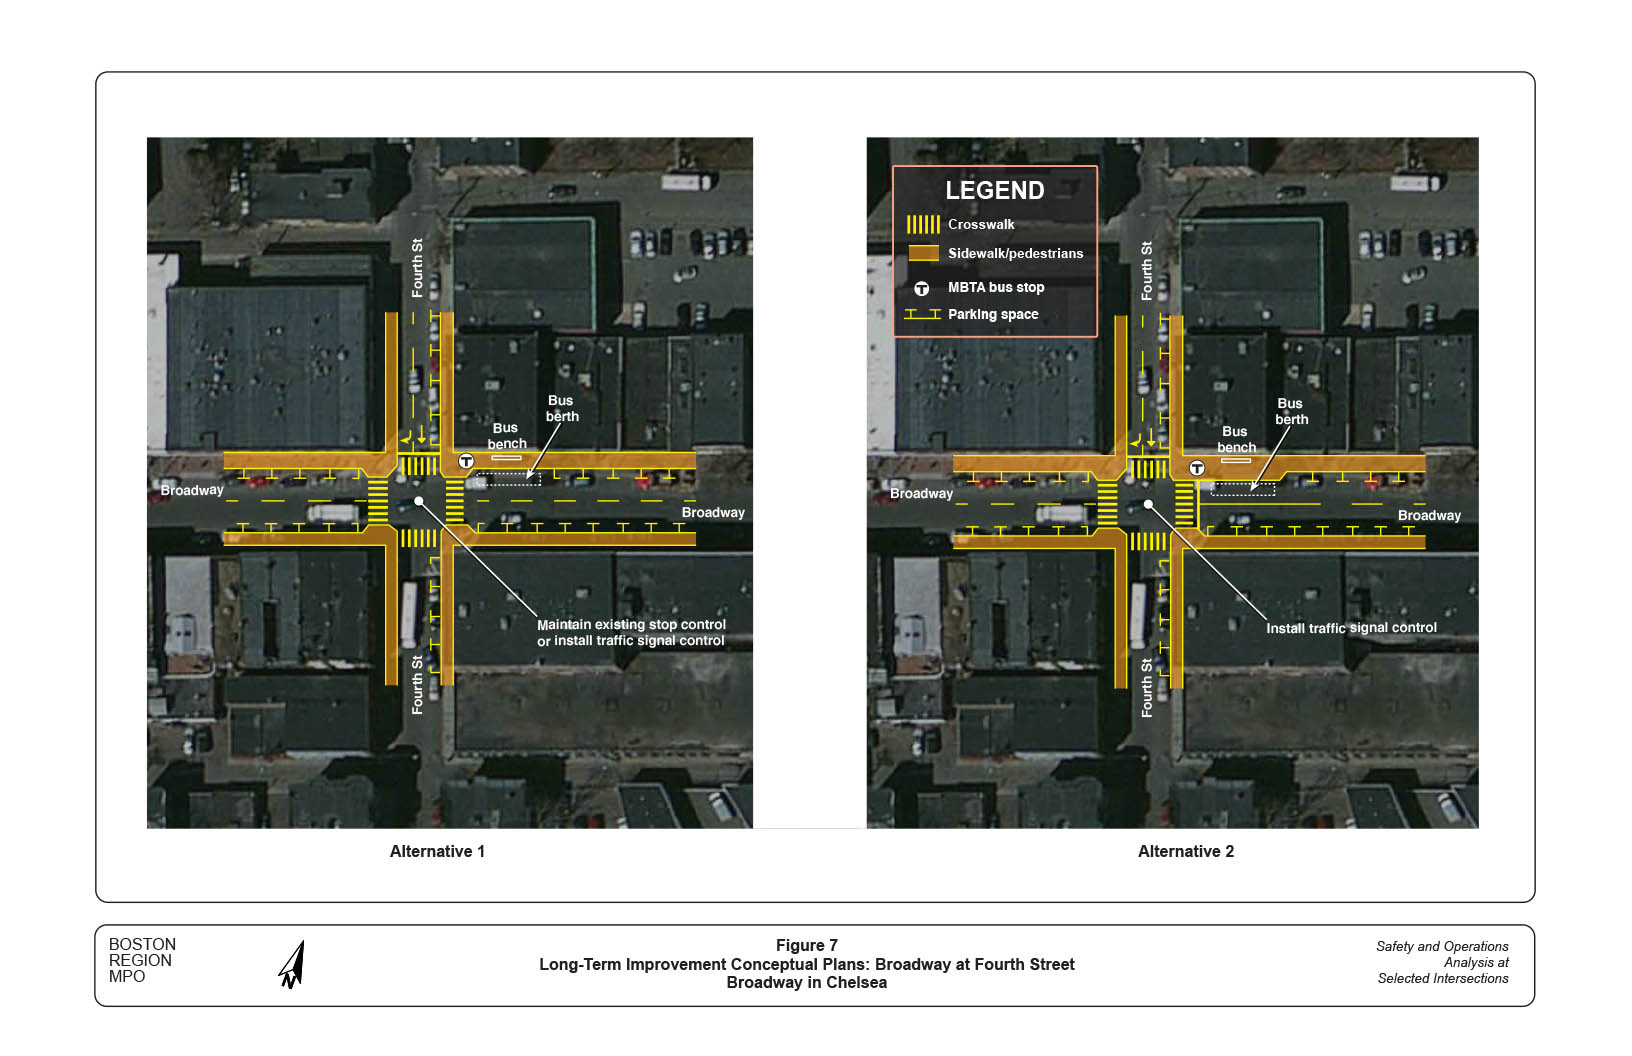 Figure 7 — Long-Term Improvement Conceptual Plans: Broadway at Fourth Street
Two separate maps, aerial views of study area with computer-drawn superimposed street and traffic maps, showing improvements under Alternatives 1 and 2, and indicating: crosswalk, sidewalk/pedestrians, MBTA bus stop, and parking space.